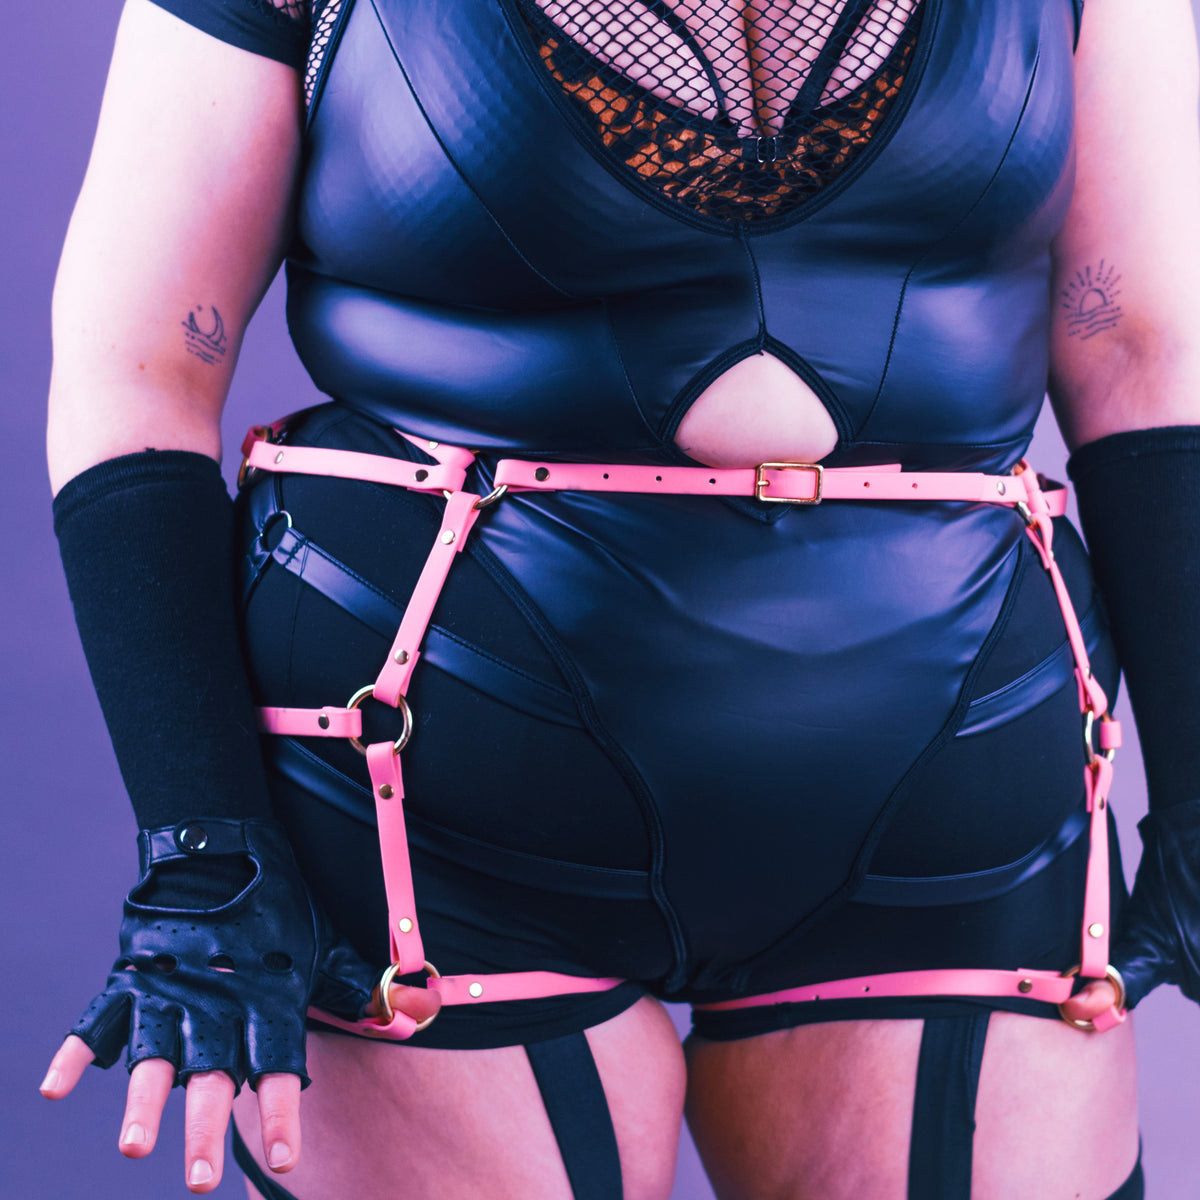 Closeup shot of woman wearing black with a pastel pink thigh harness over her bottom.